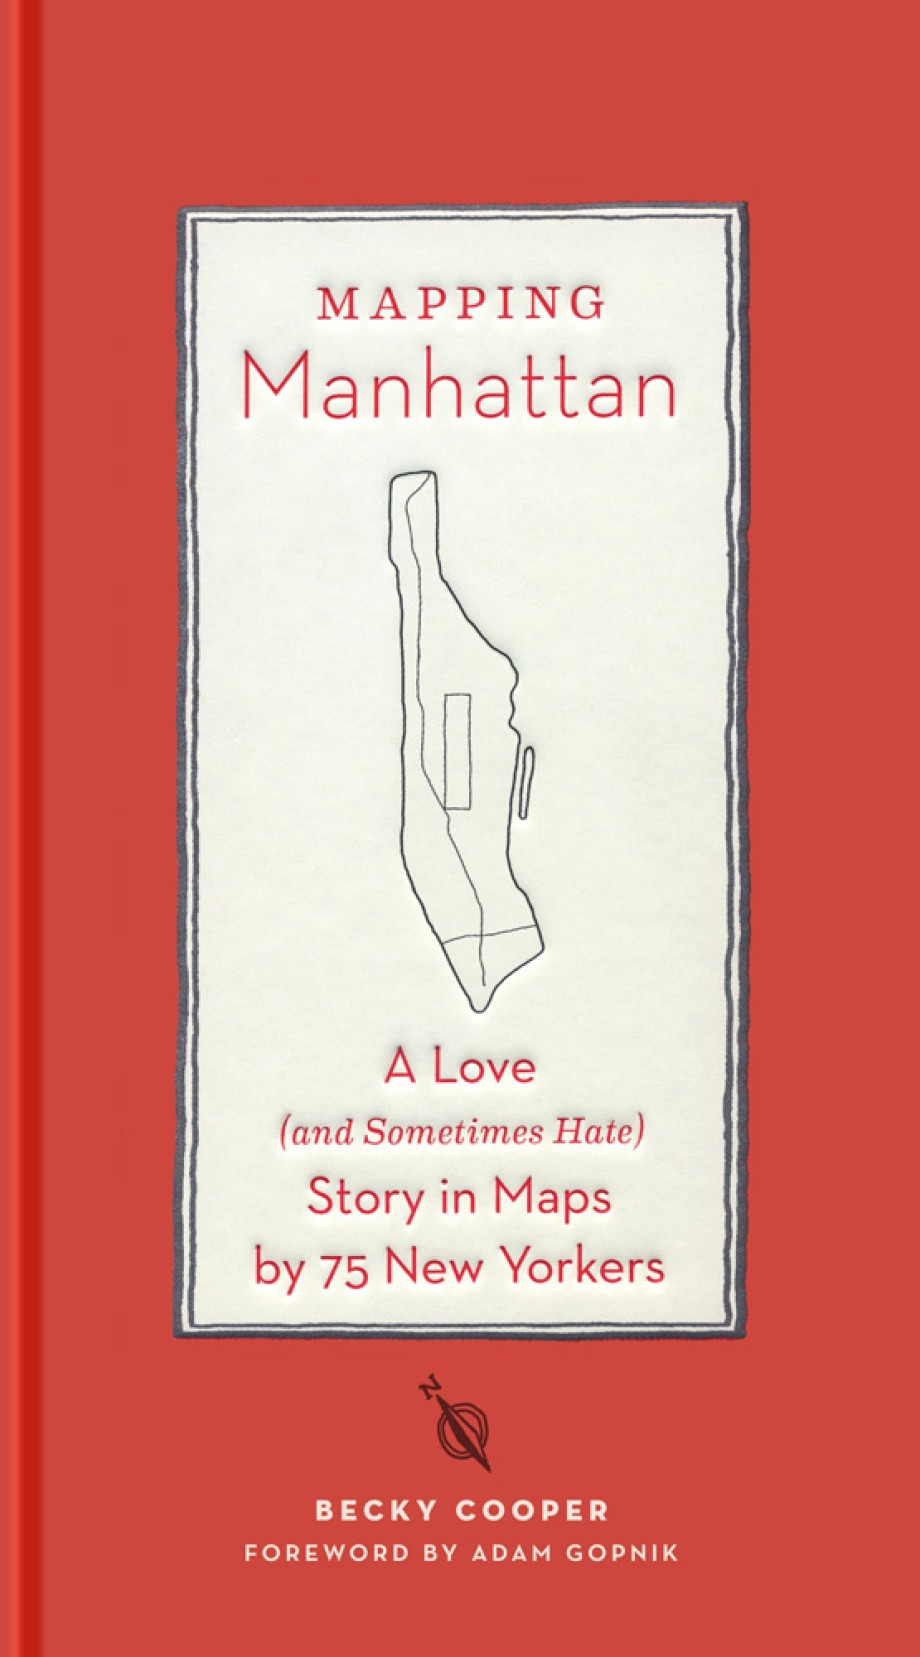 Mapping Manhattan A Love (and Sometimes Hate) Story in Maps by 75 New Yorkers